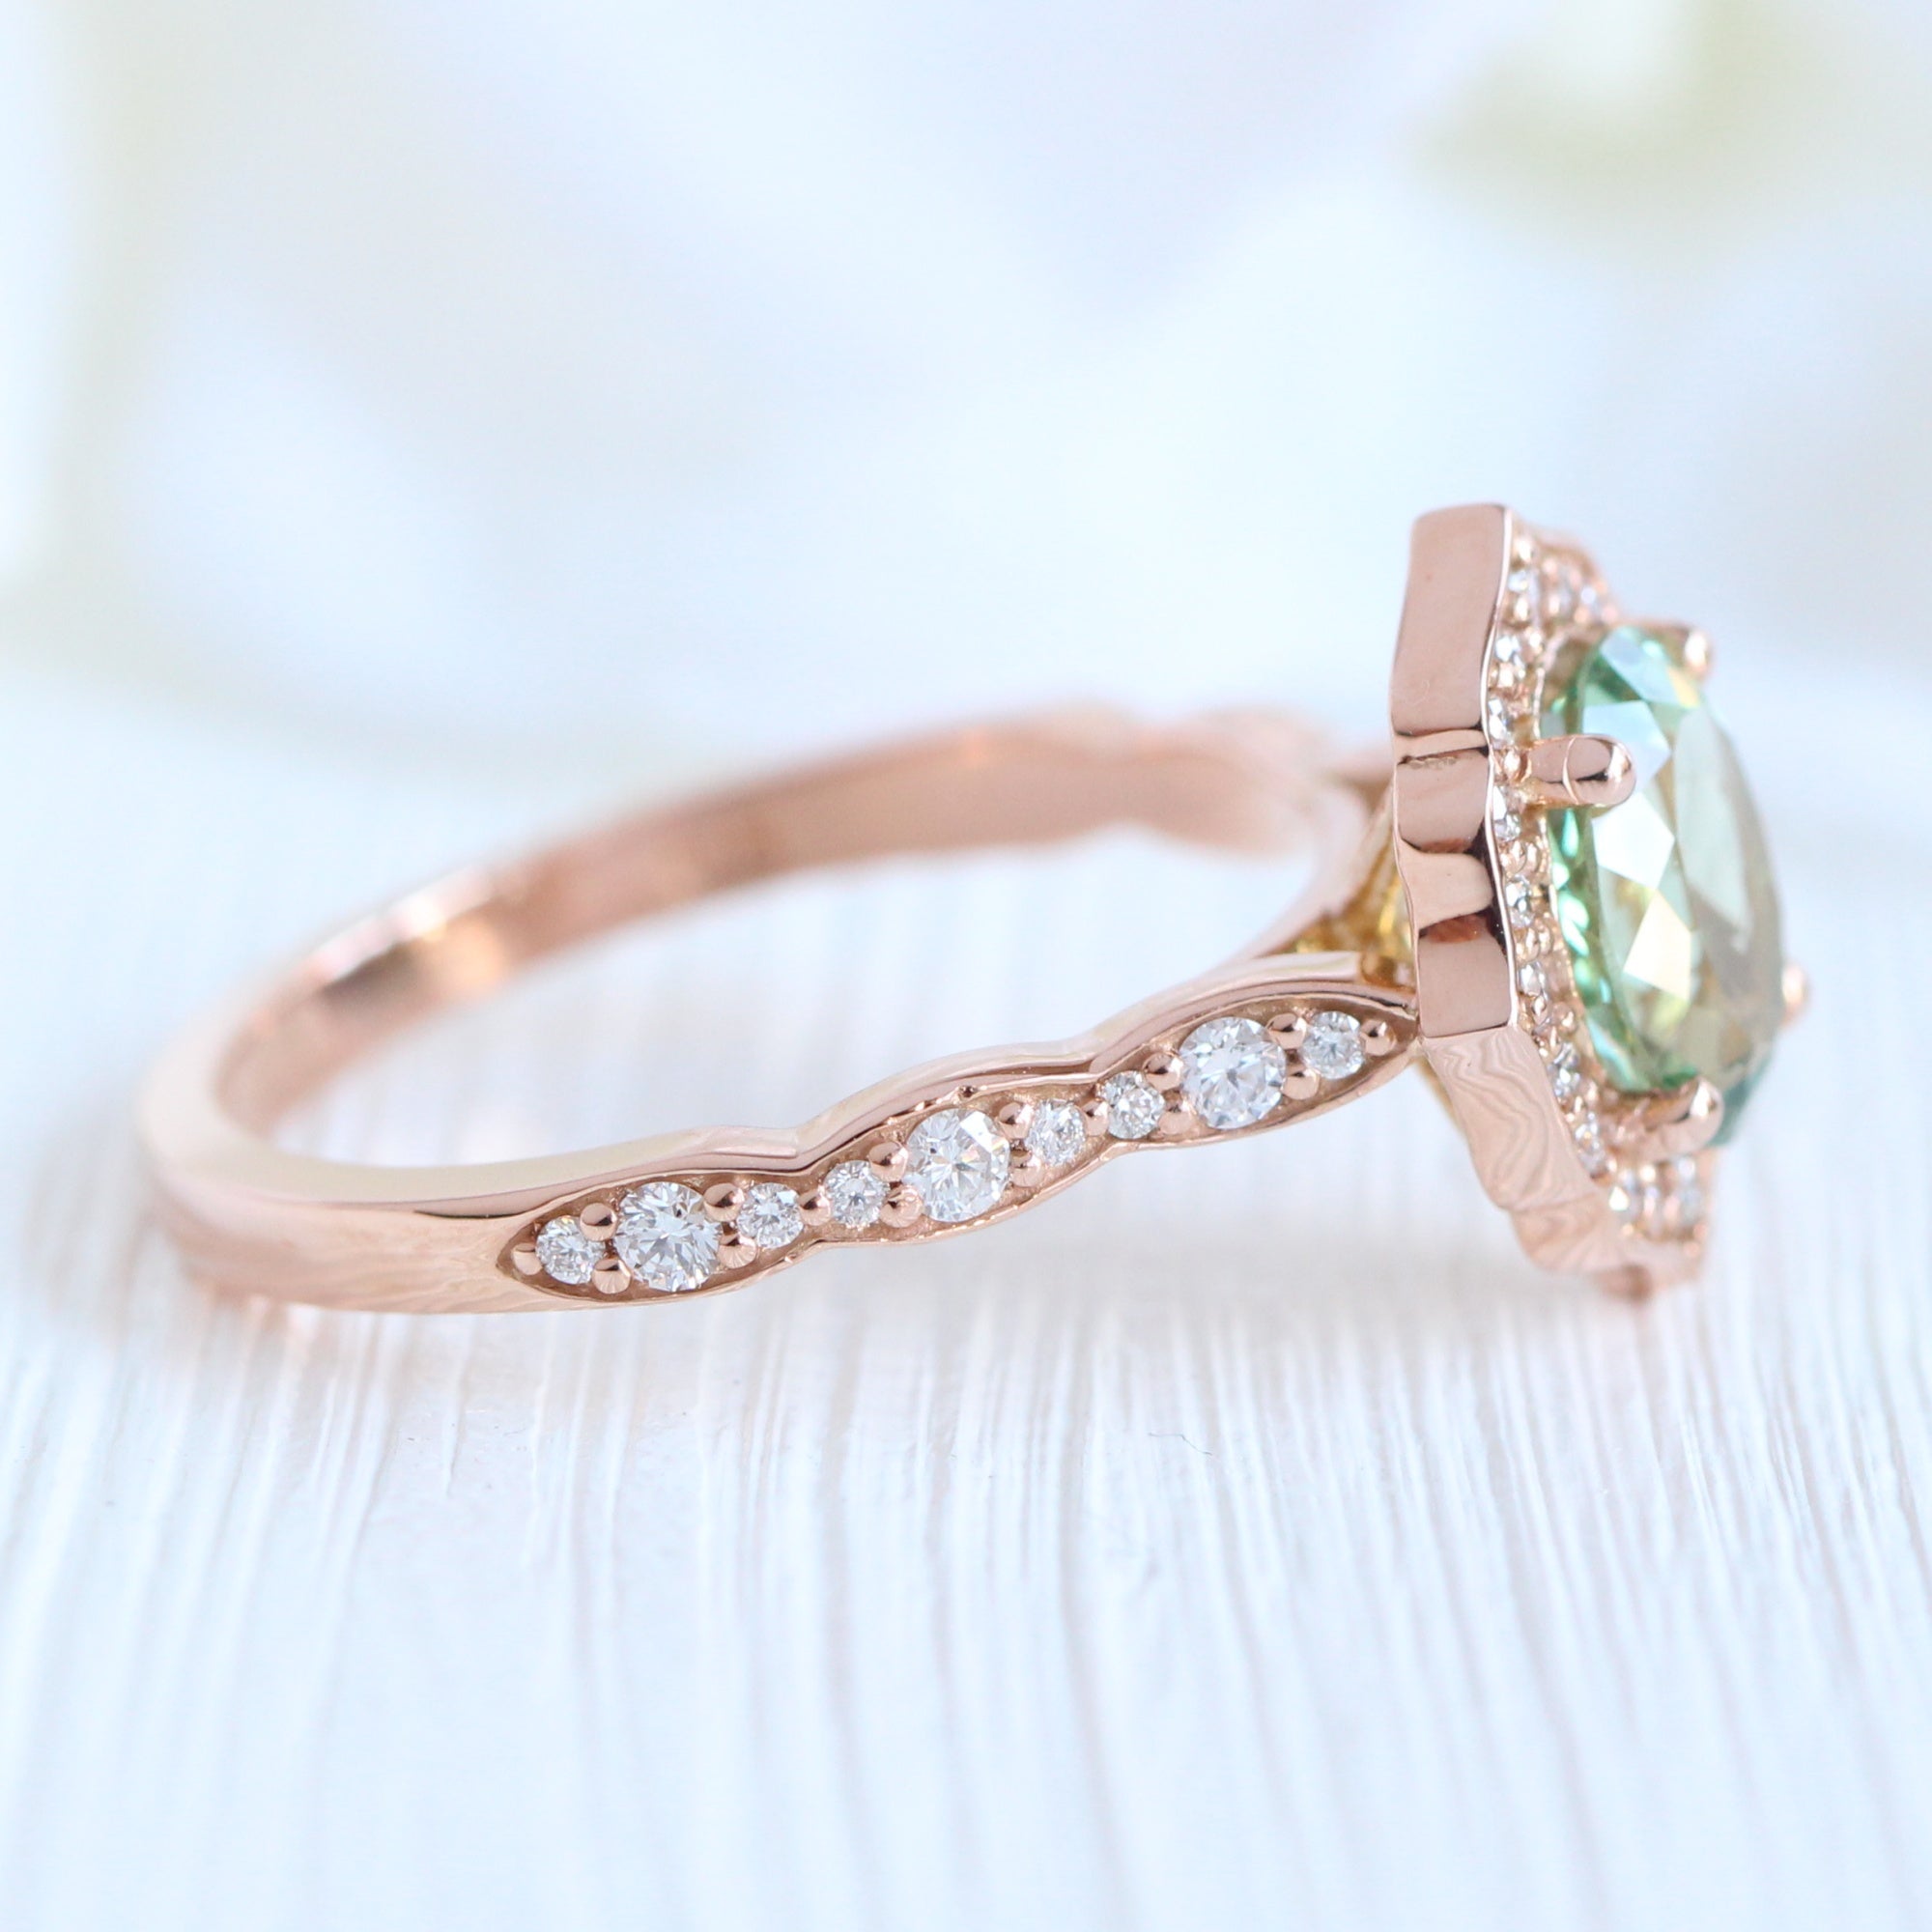 Oval green sapphire ring rose gold vintage halo diamond ring la more design jewelry